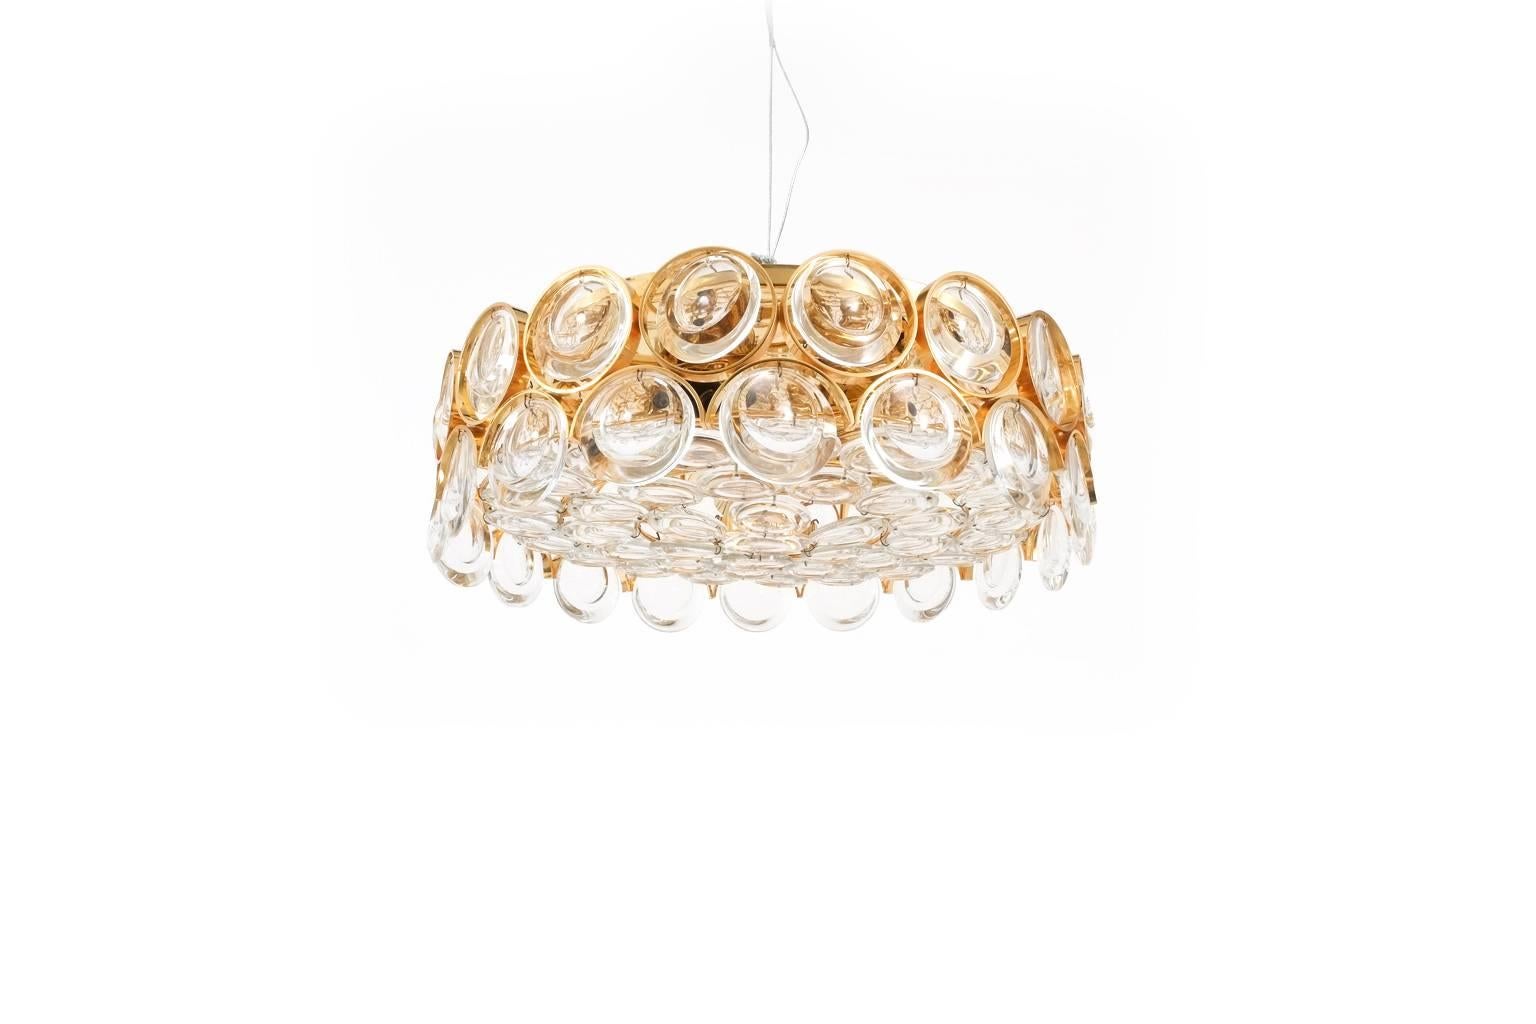 Palwa Gold Brass Glass Flush Mount Ceiling lamp, Germany 1960, composed of two rows of gilt brass rings with optical glass circles. Bottom surface fully covered with suspended glass pieces. The light has been professionally restored and rewired